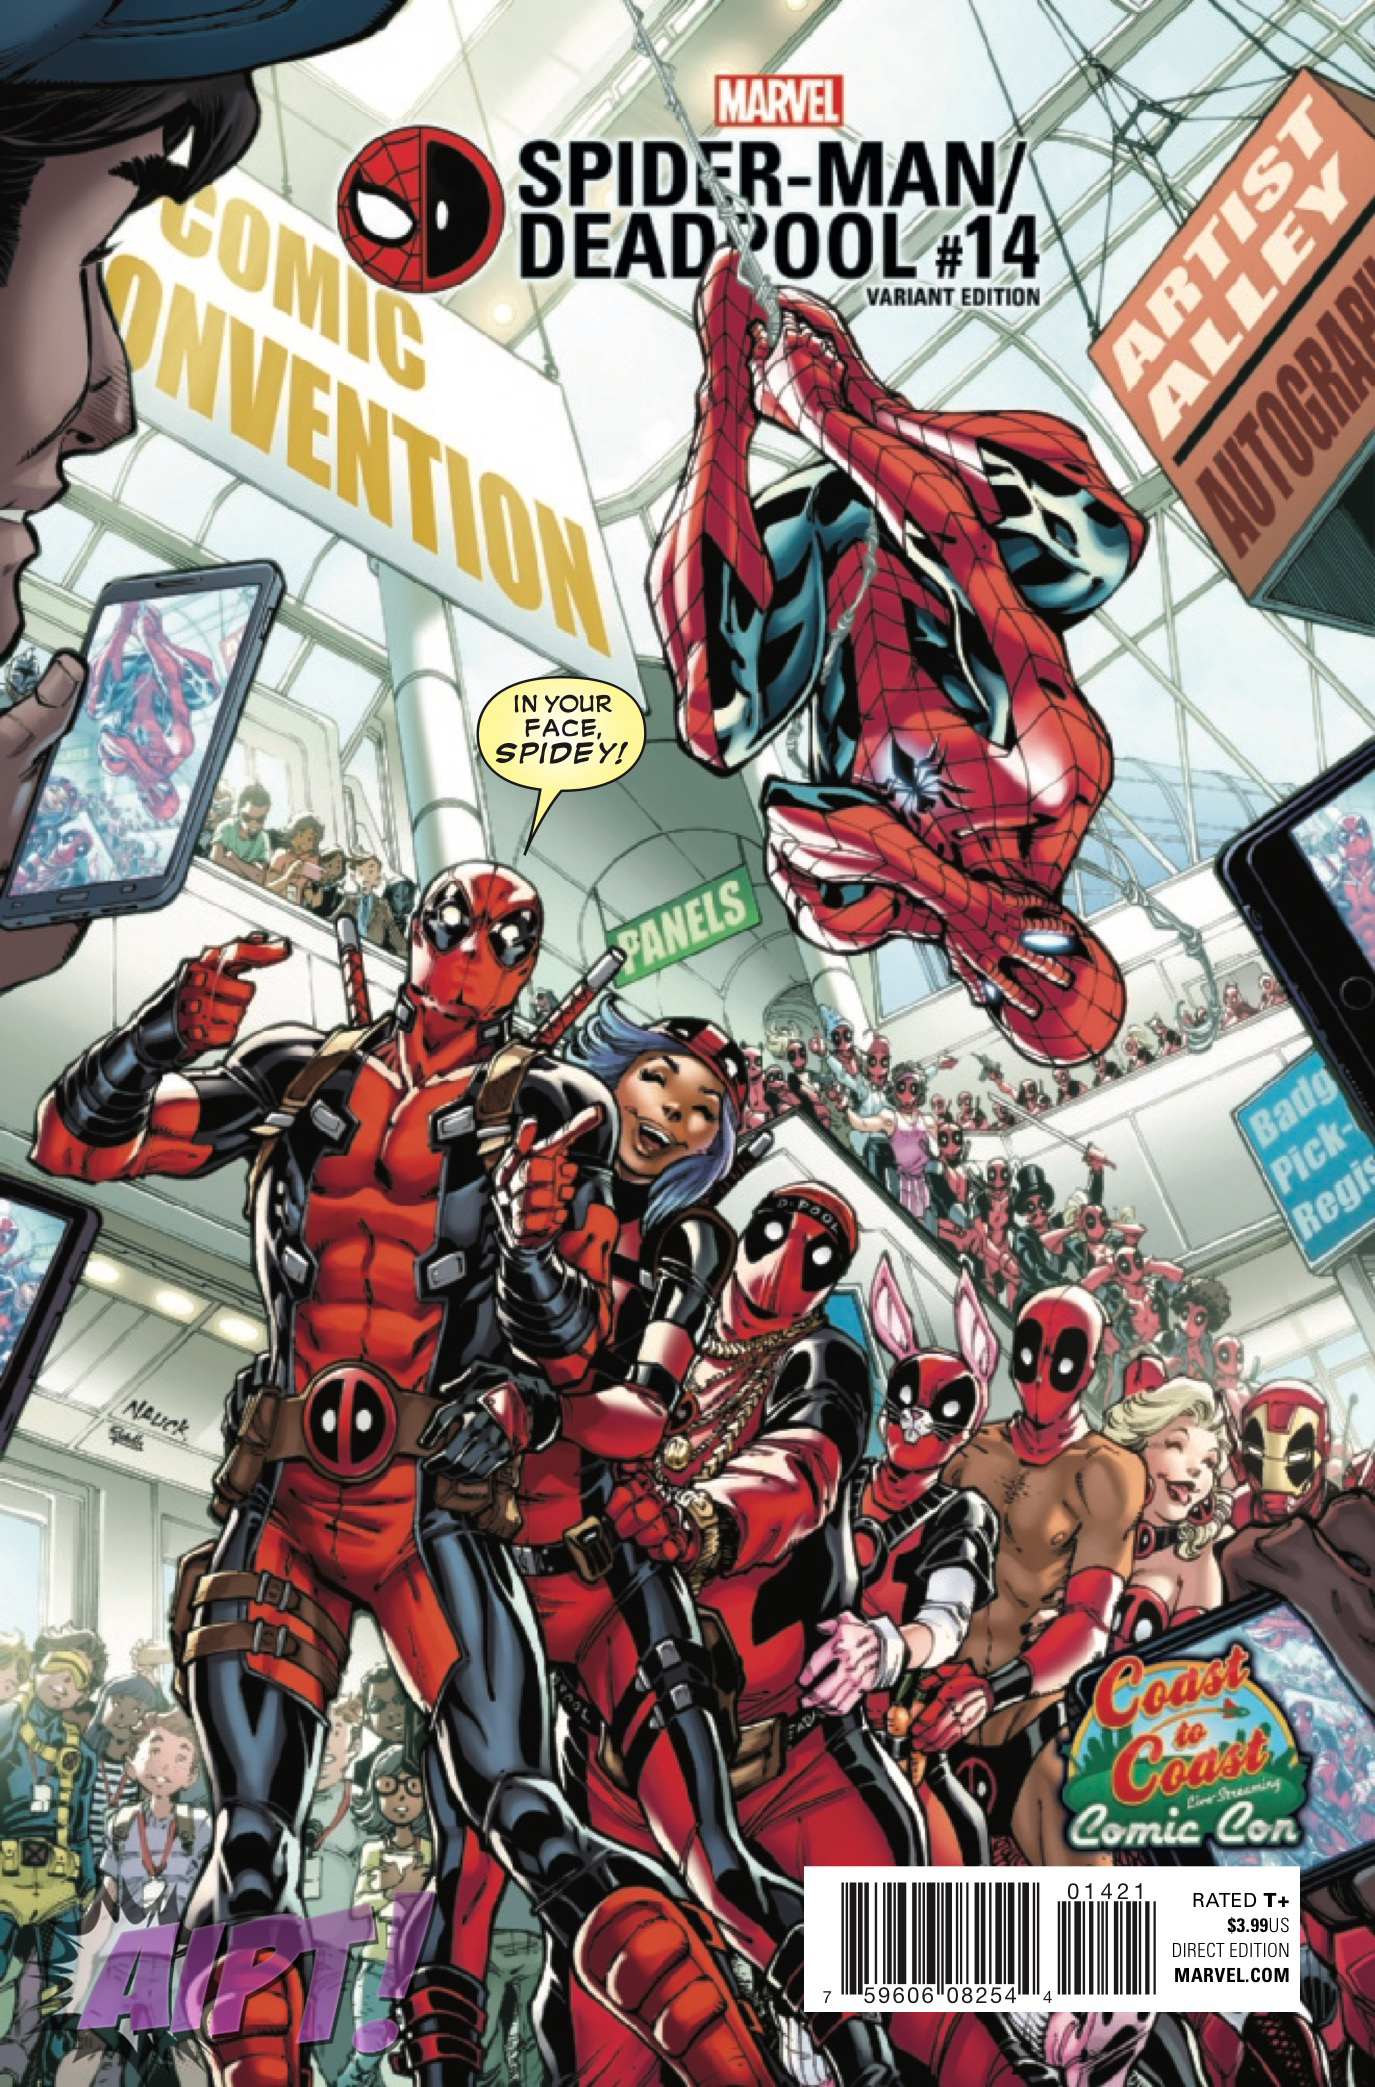 [EXCLUSIVE] Marvel Preview: Spider-Man/Deadpool #14